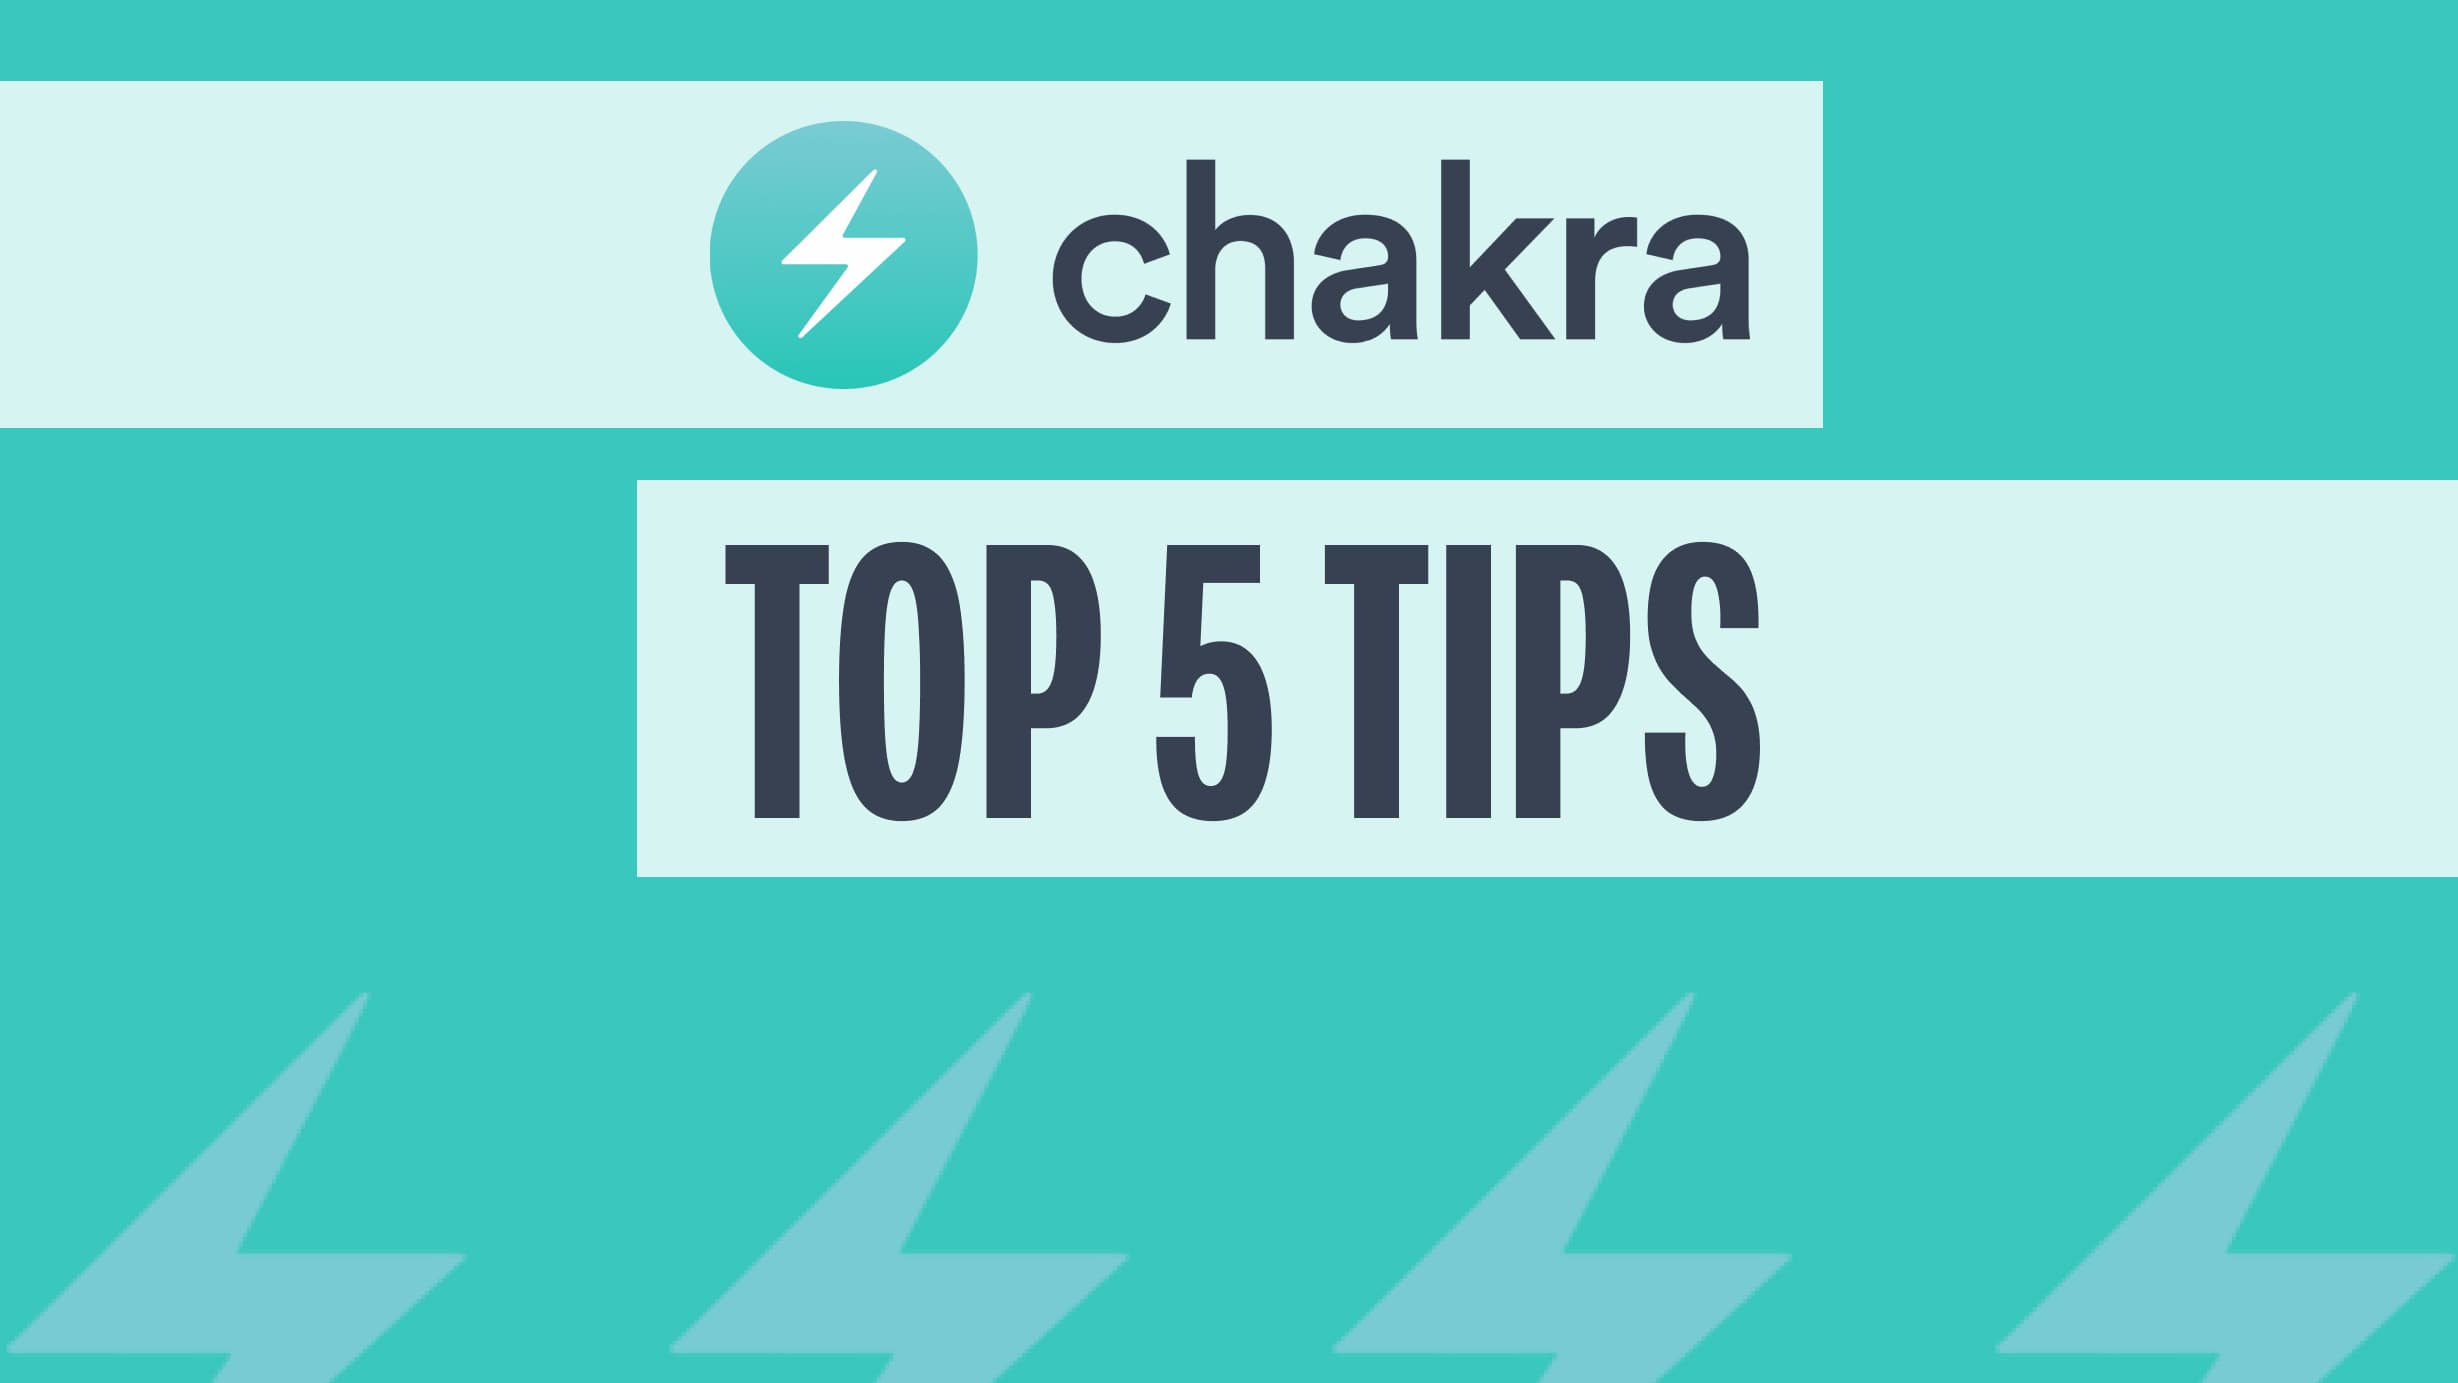 Graphic with blue and mint green background showing the text "chakra UI top 5 tips" with a lightning bolt icon in the header.